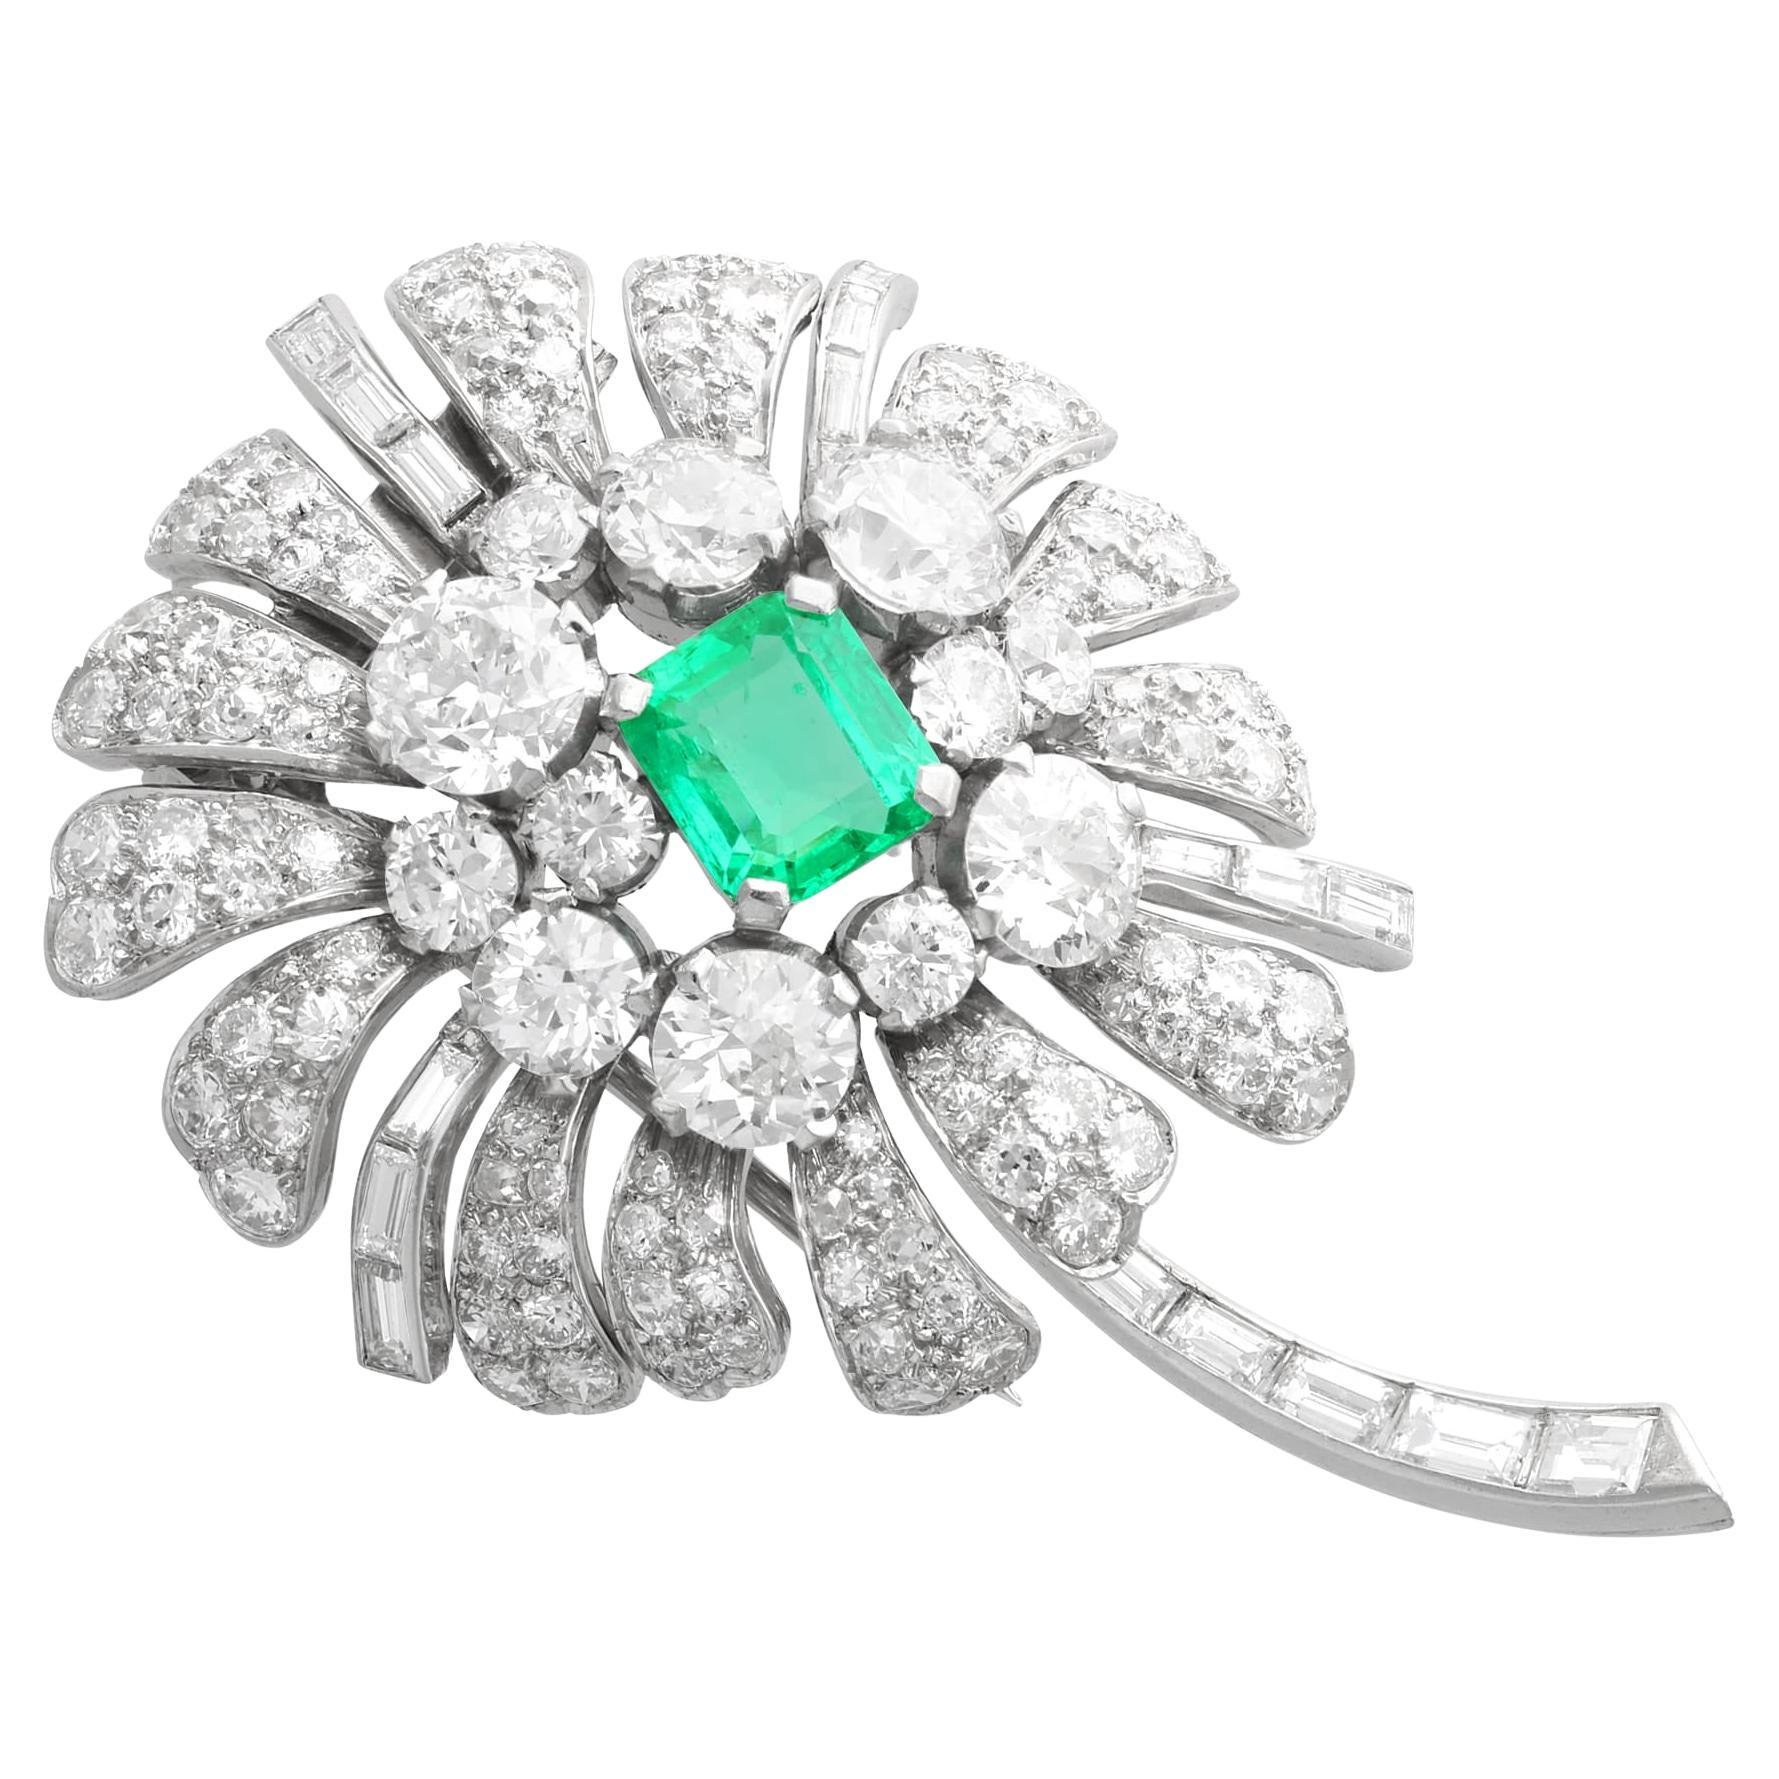 Antique 2.10Ct Emerald and 7.73Ct Diamond Platinum Floral Brooch Circa 1900 For Sale